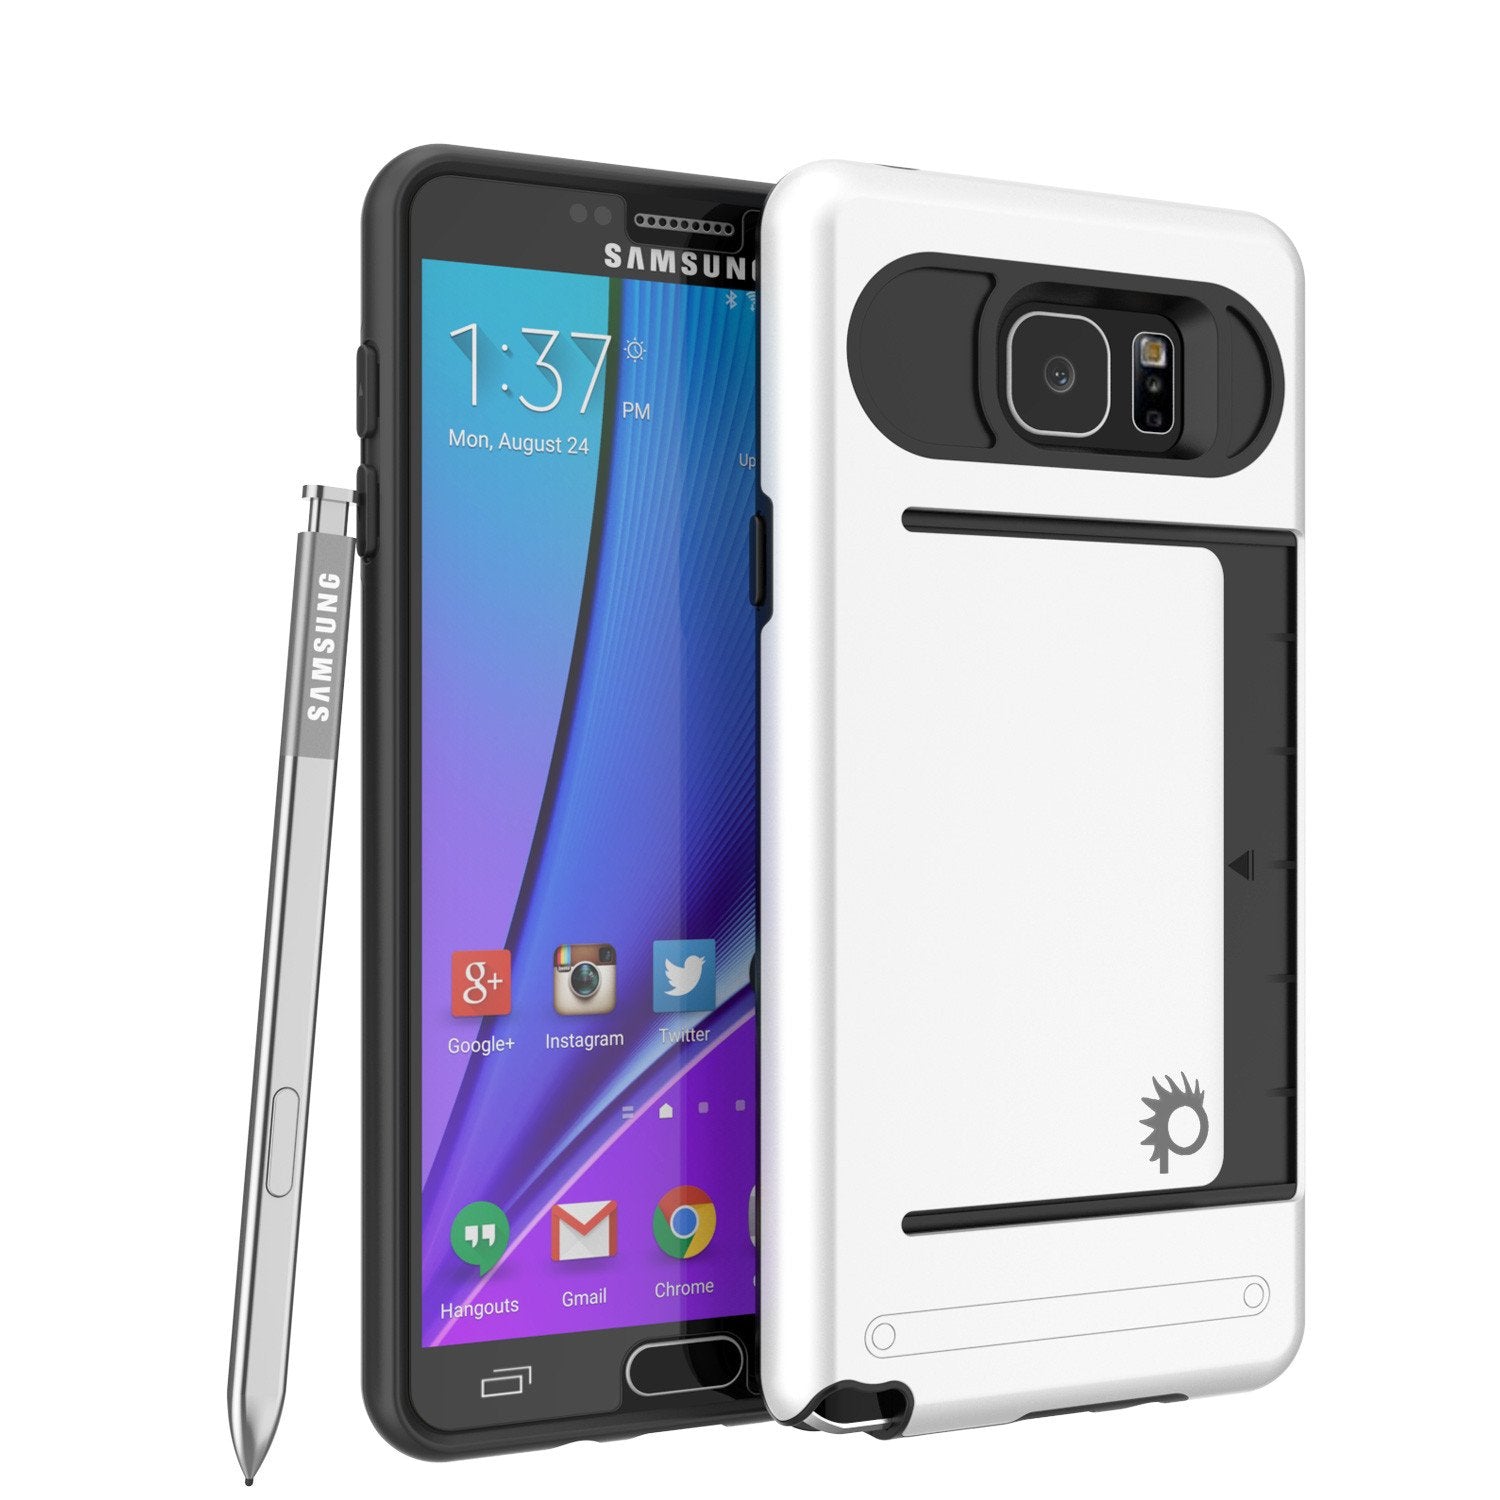 Galaxy Note 5 Case PunkCase CLUTCH White Series Slim Armor Soft Cover Case w/ Tempered Glass